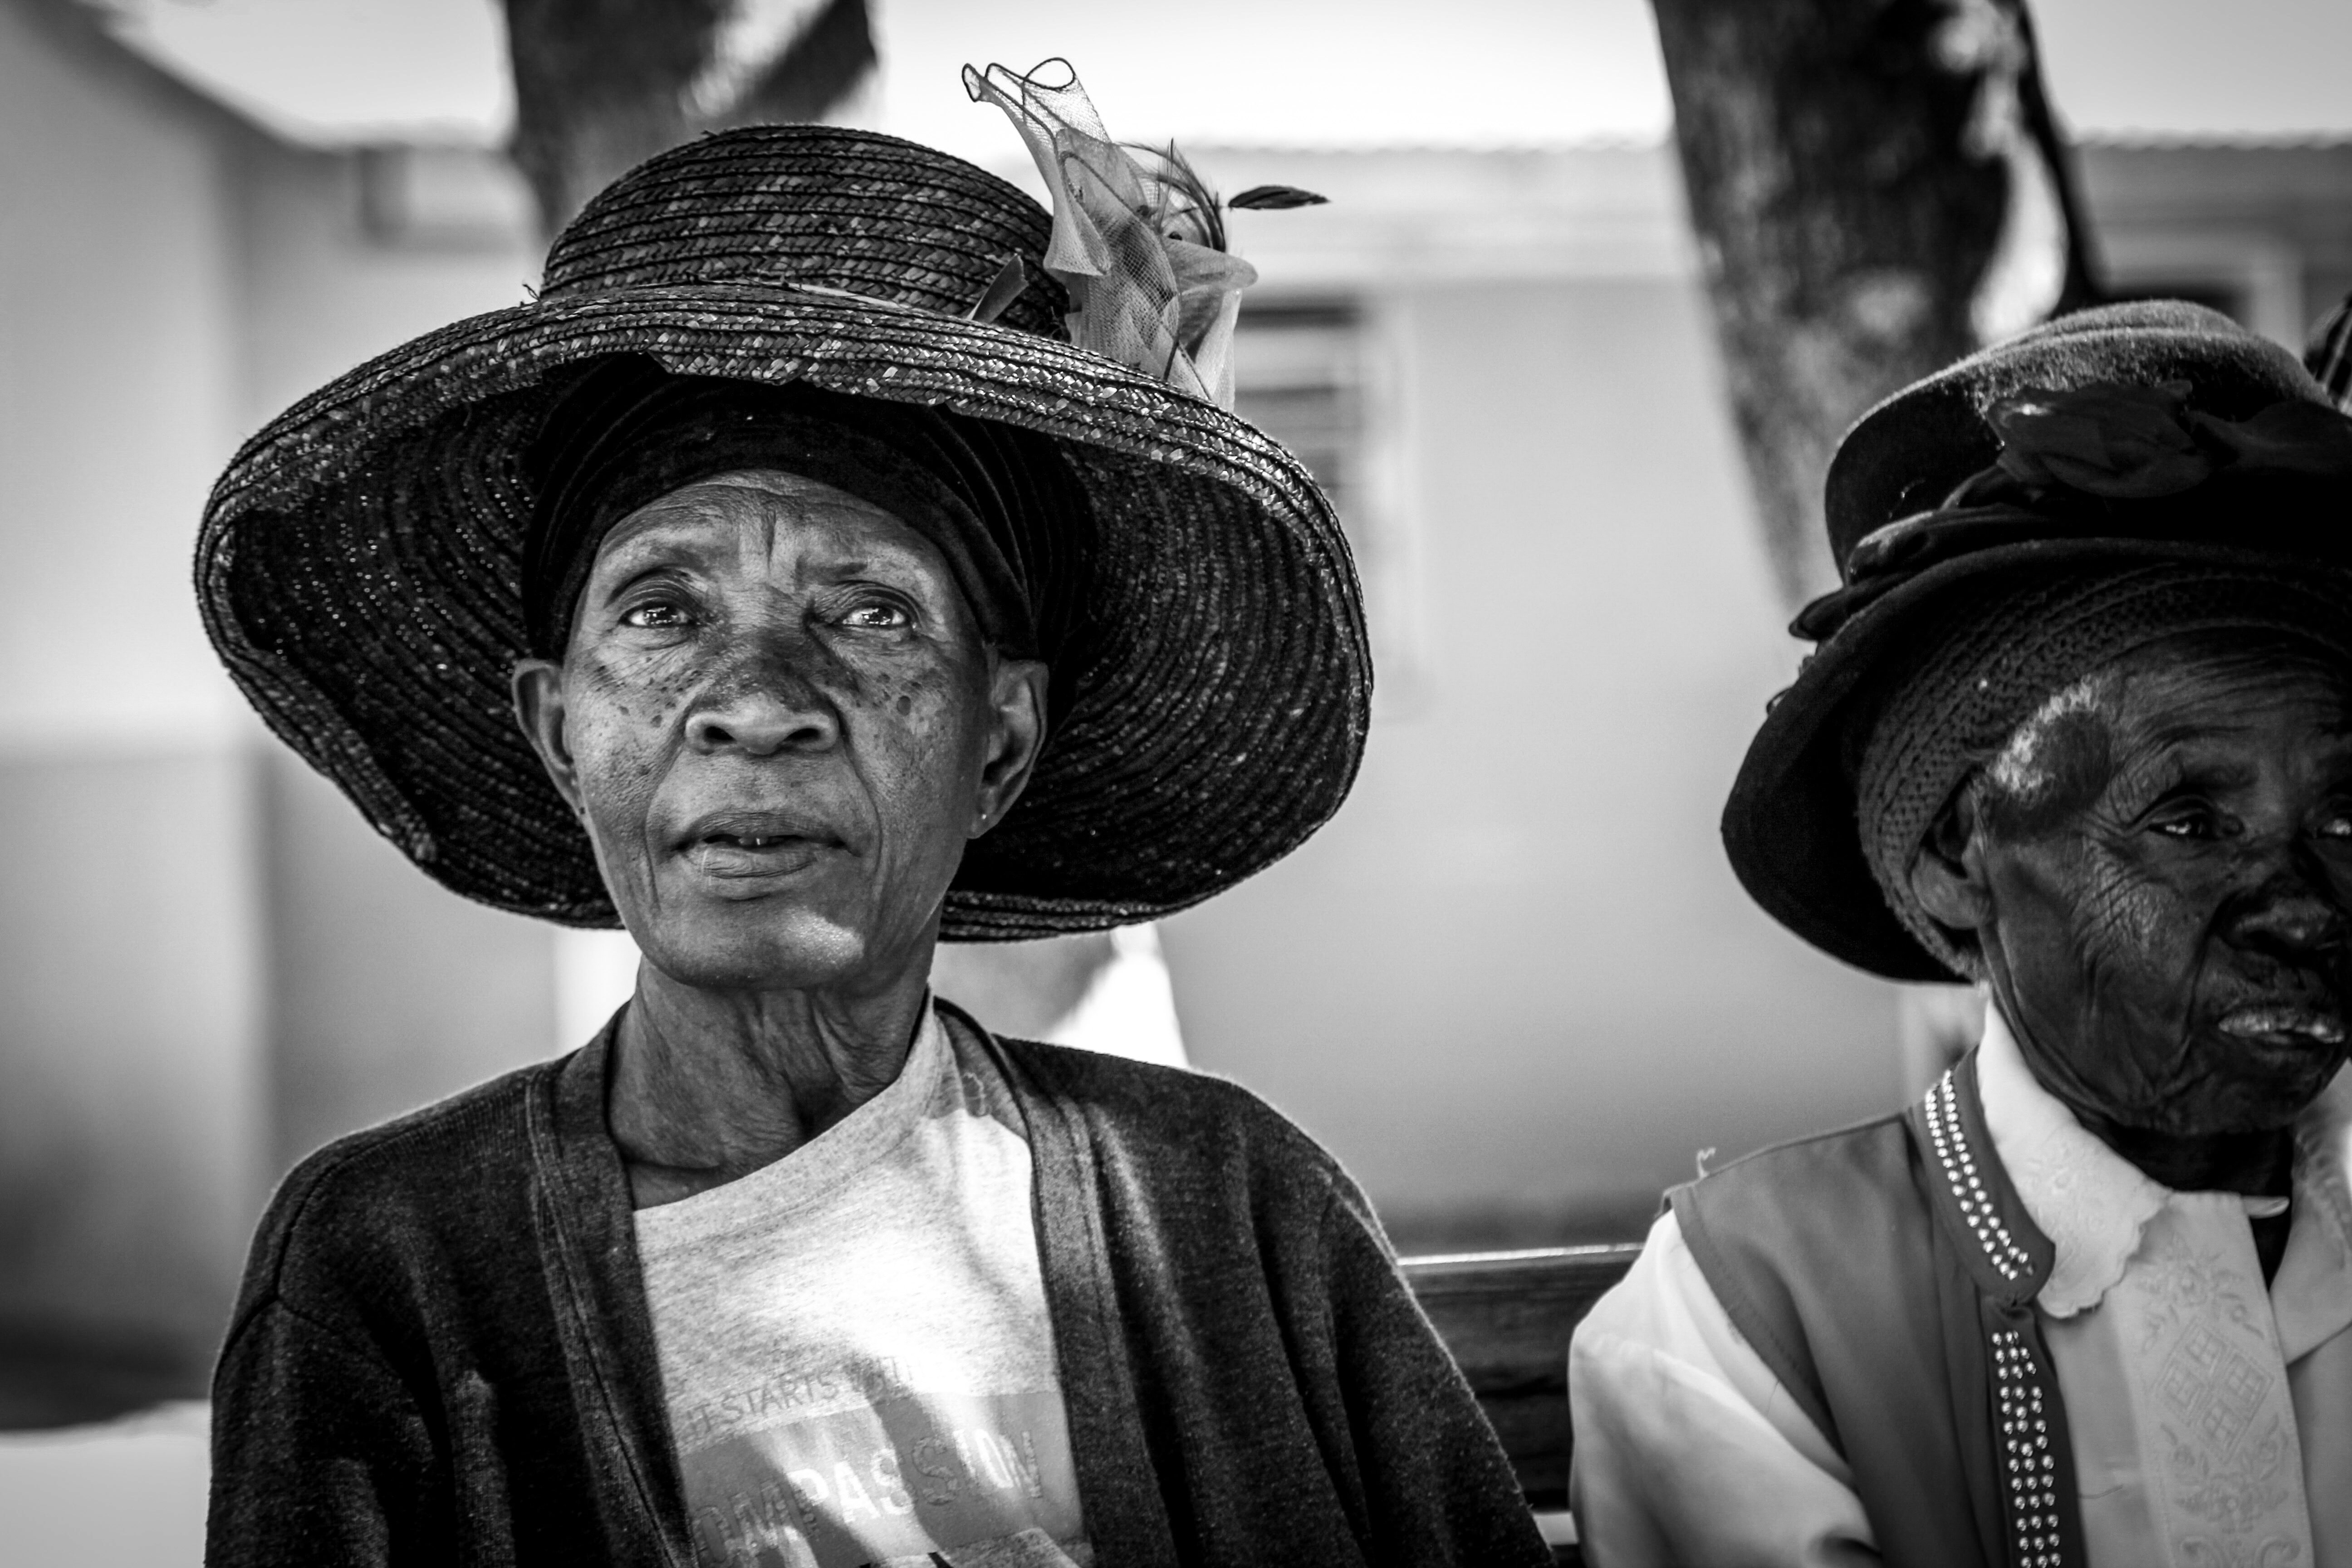 In a senior center near Luanshya an old lady is intrigued by our presence. Her eyes are proud, fixed and curious, and she seems to tell us something. Luanshya, Zambia July 2019.